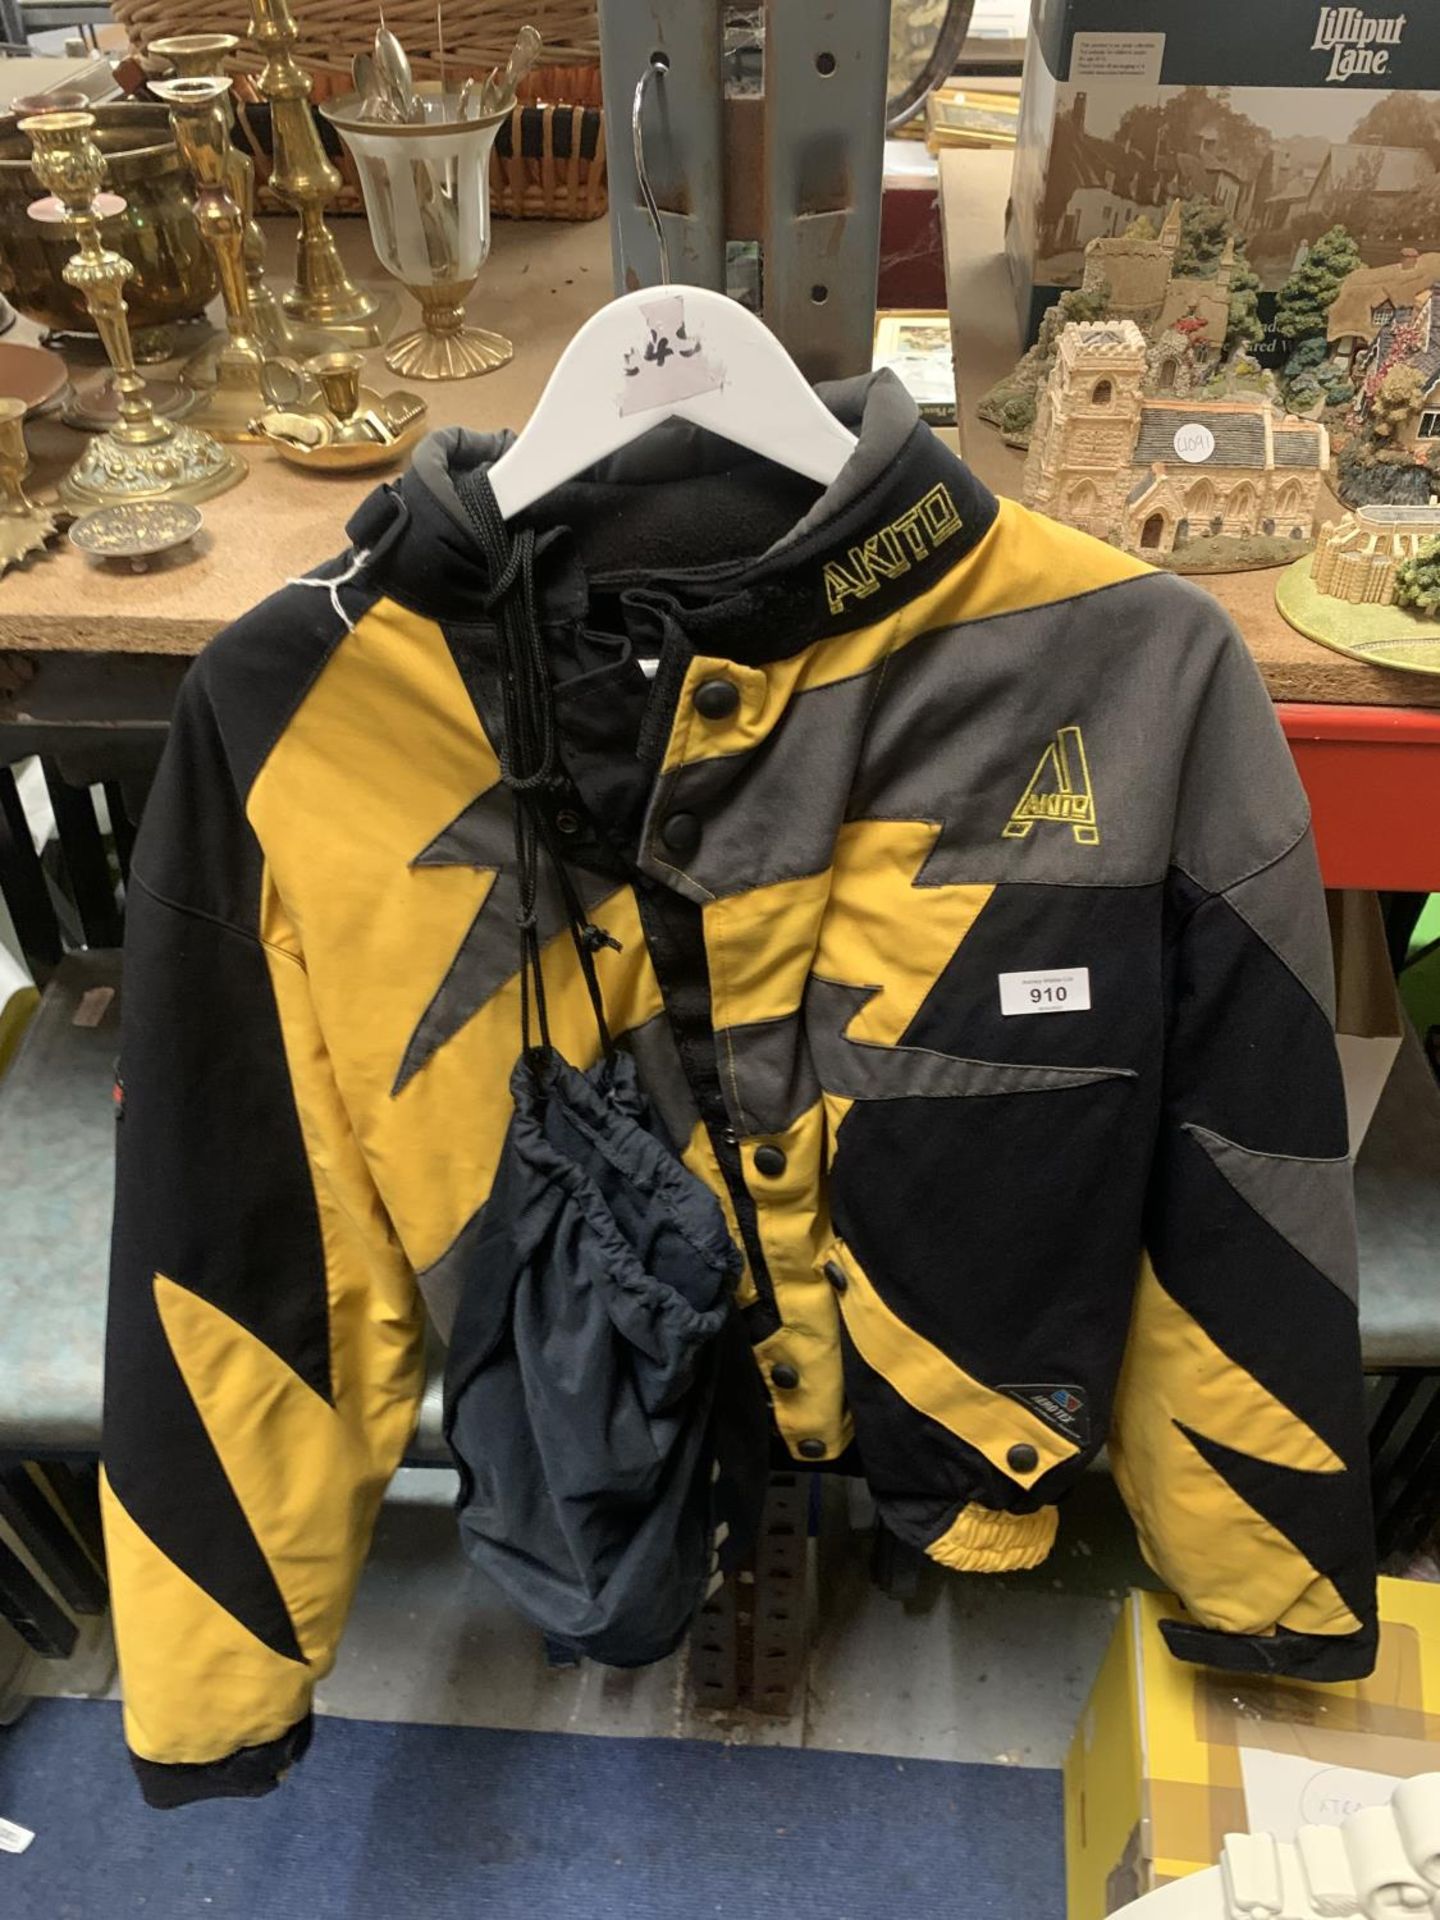 A MOTORCYCLING JACKET SIZE L IN BLACK AND YELLOW